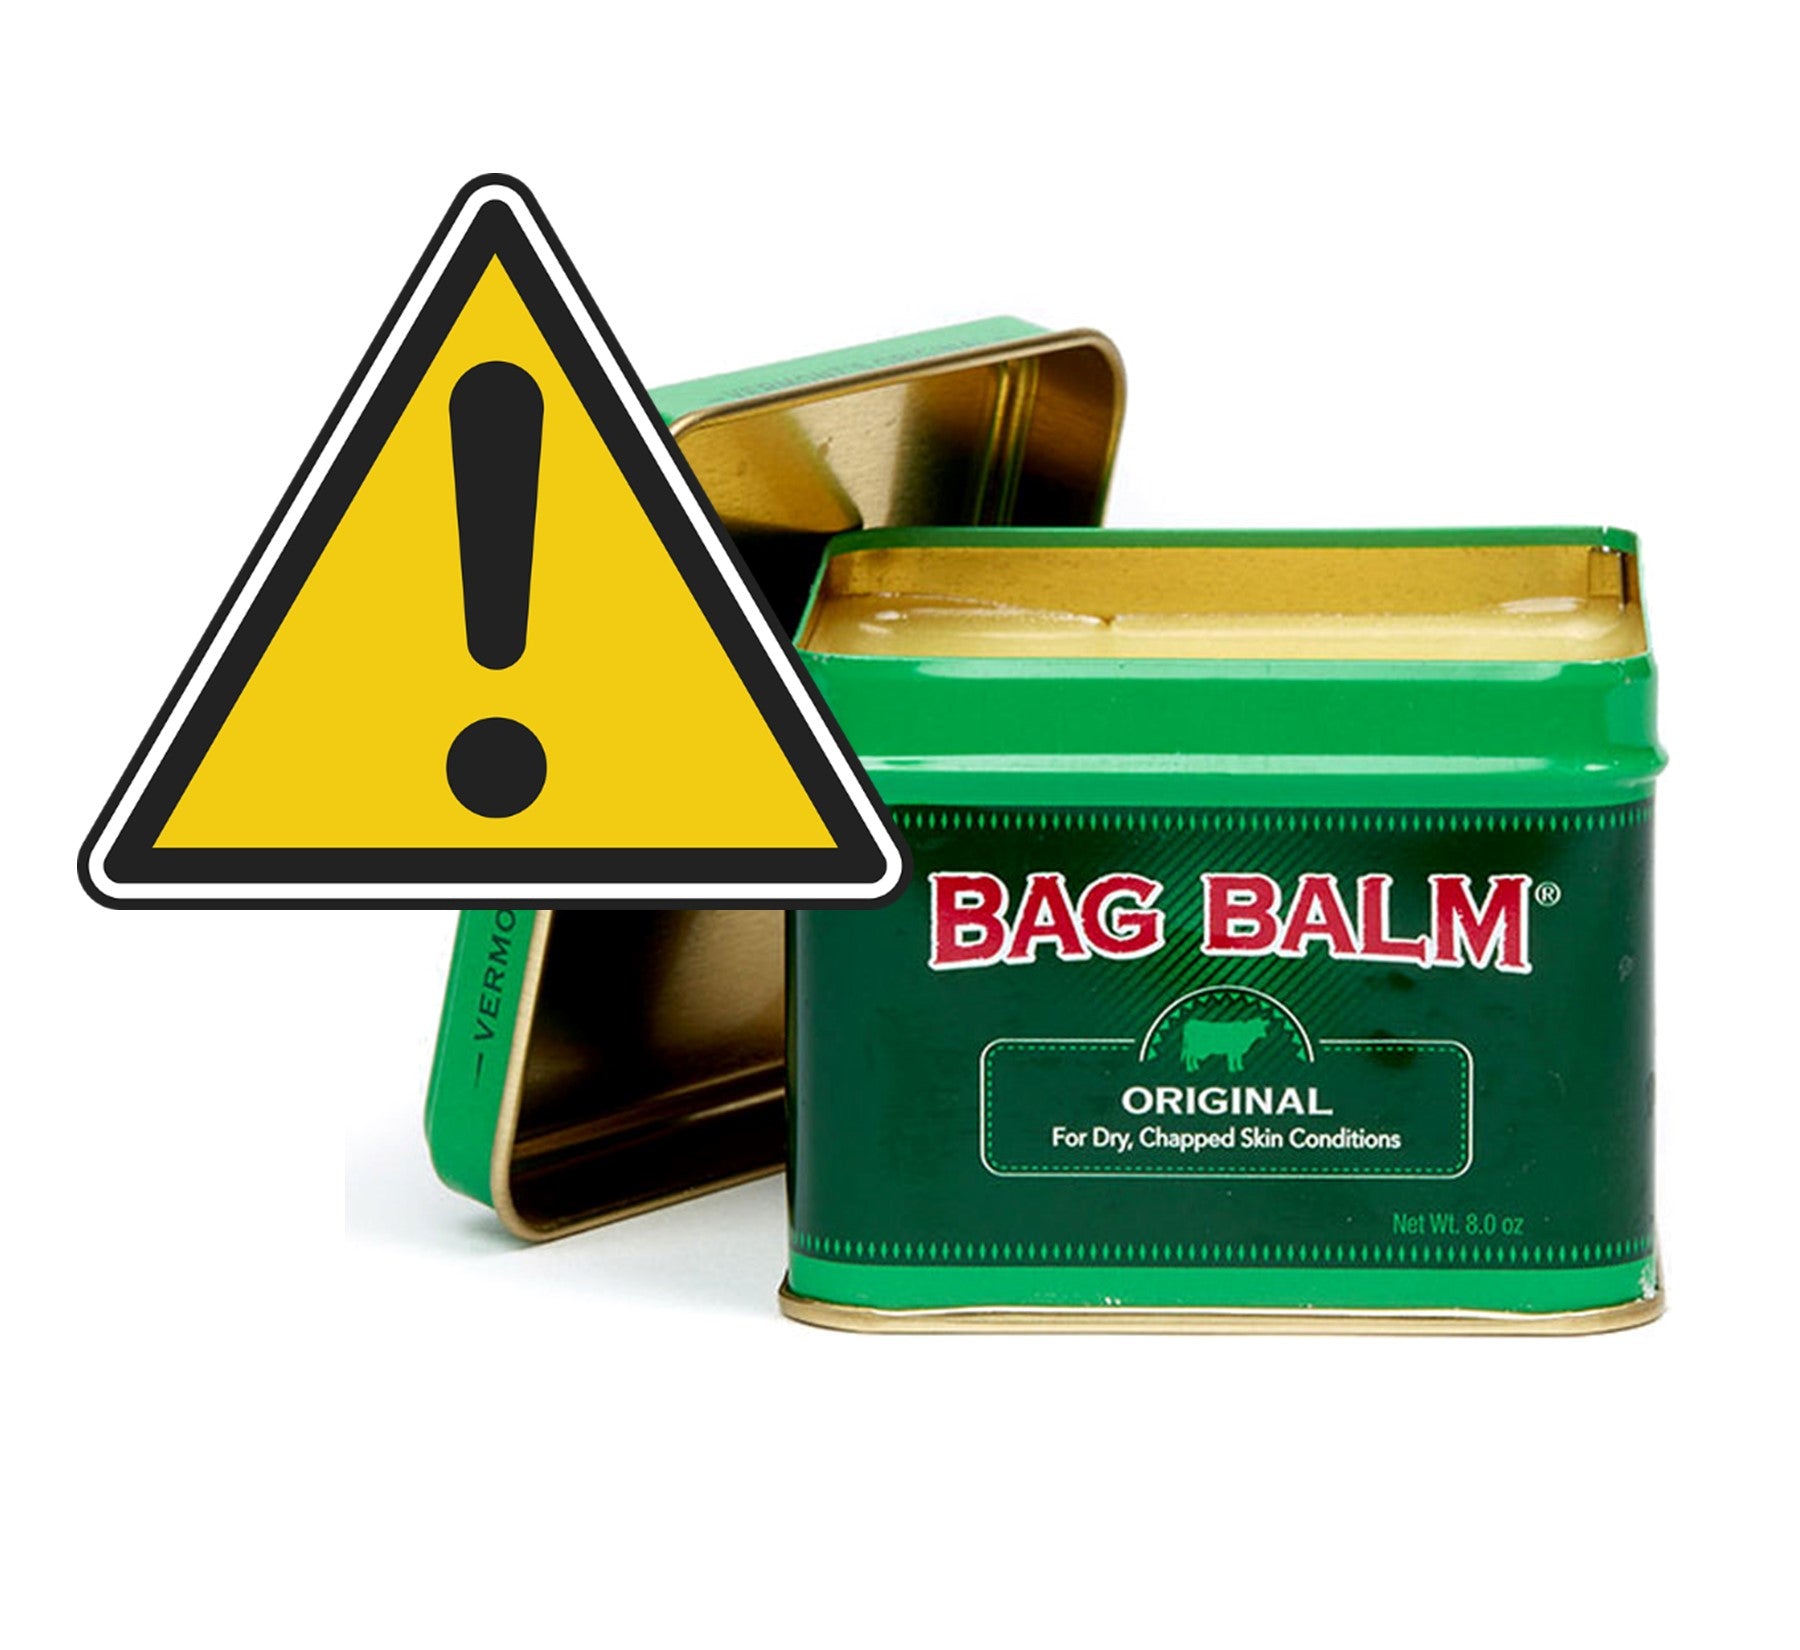 What is Bag Balm Bag Balm Review And The Top 10 Bag Balm Uses  The  Dermatology Review